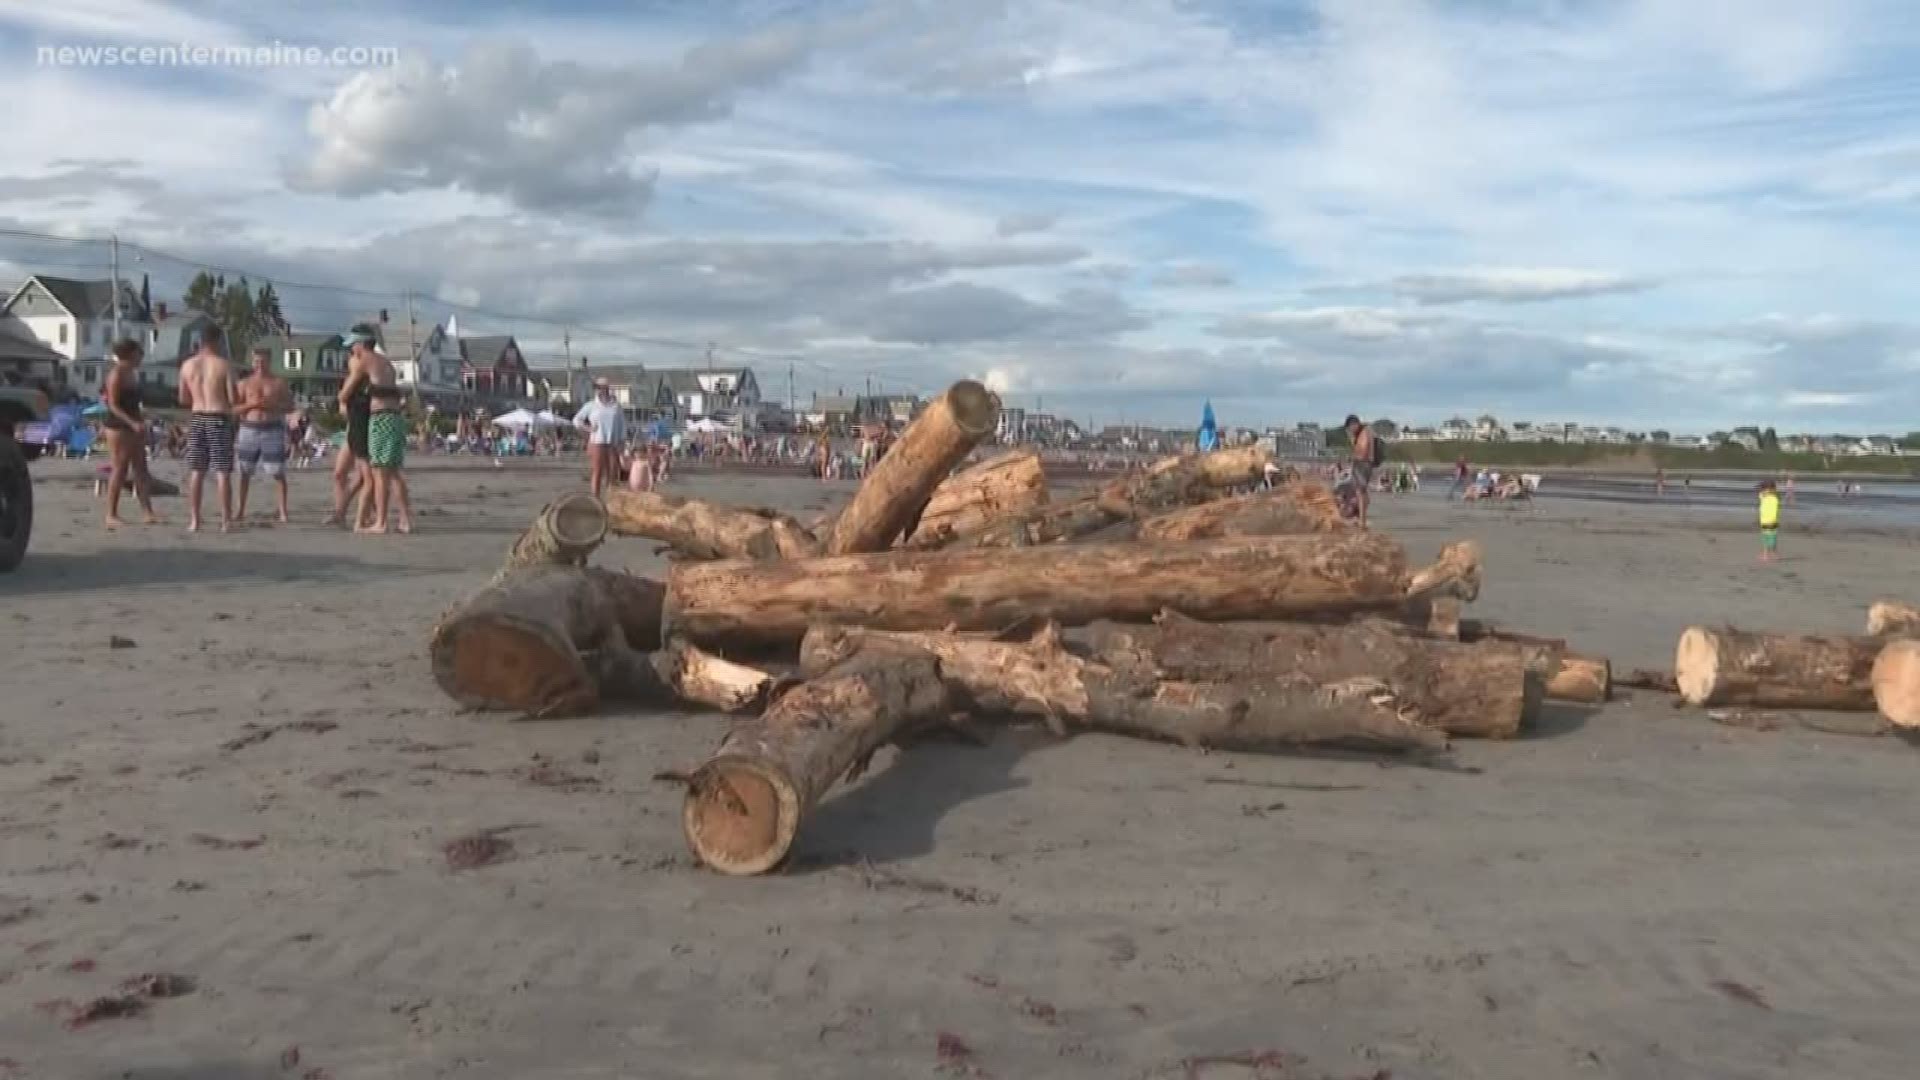 A family in York is giving back to the community through a beach benefit bonfire event.